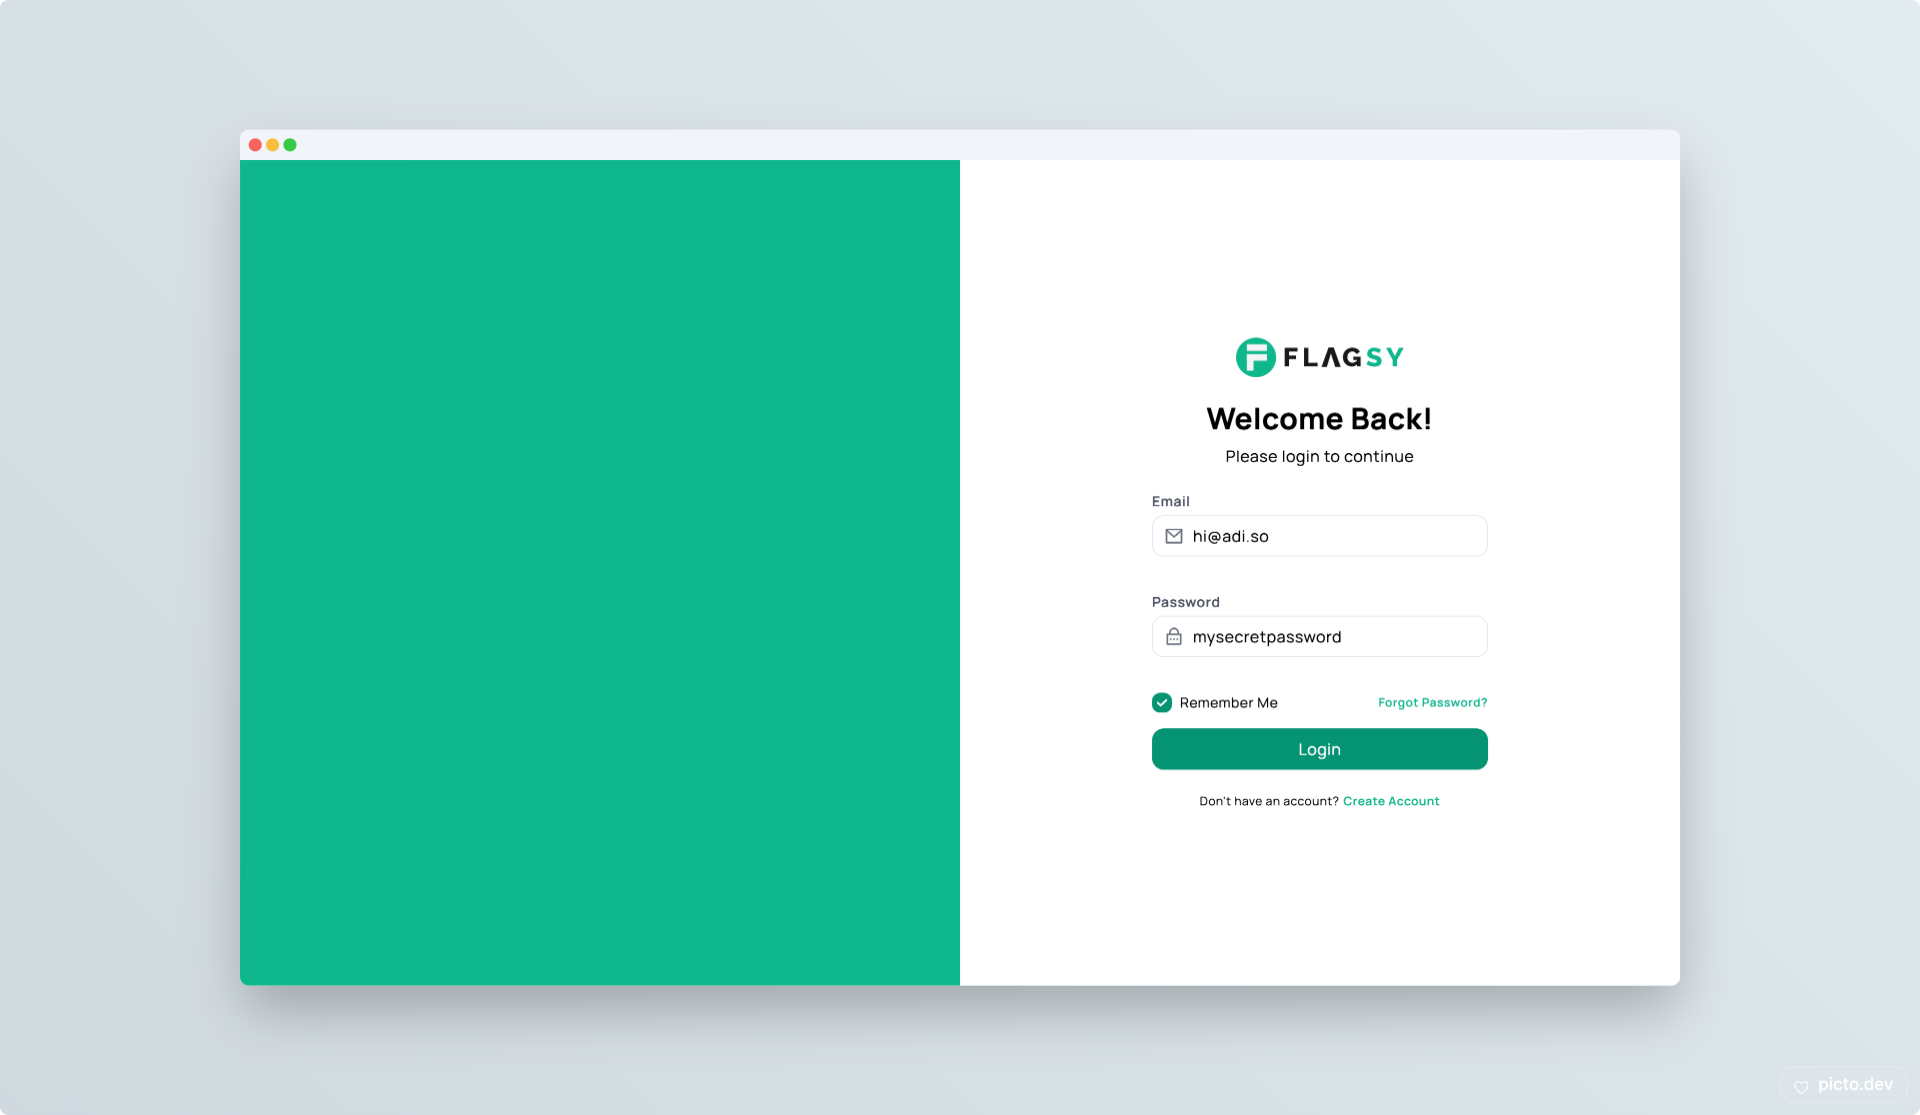 Flagsy login page